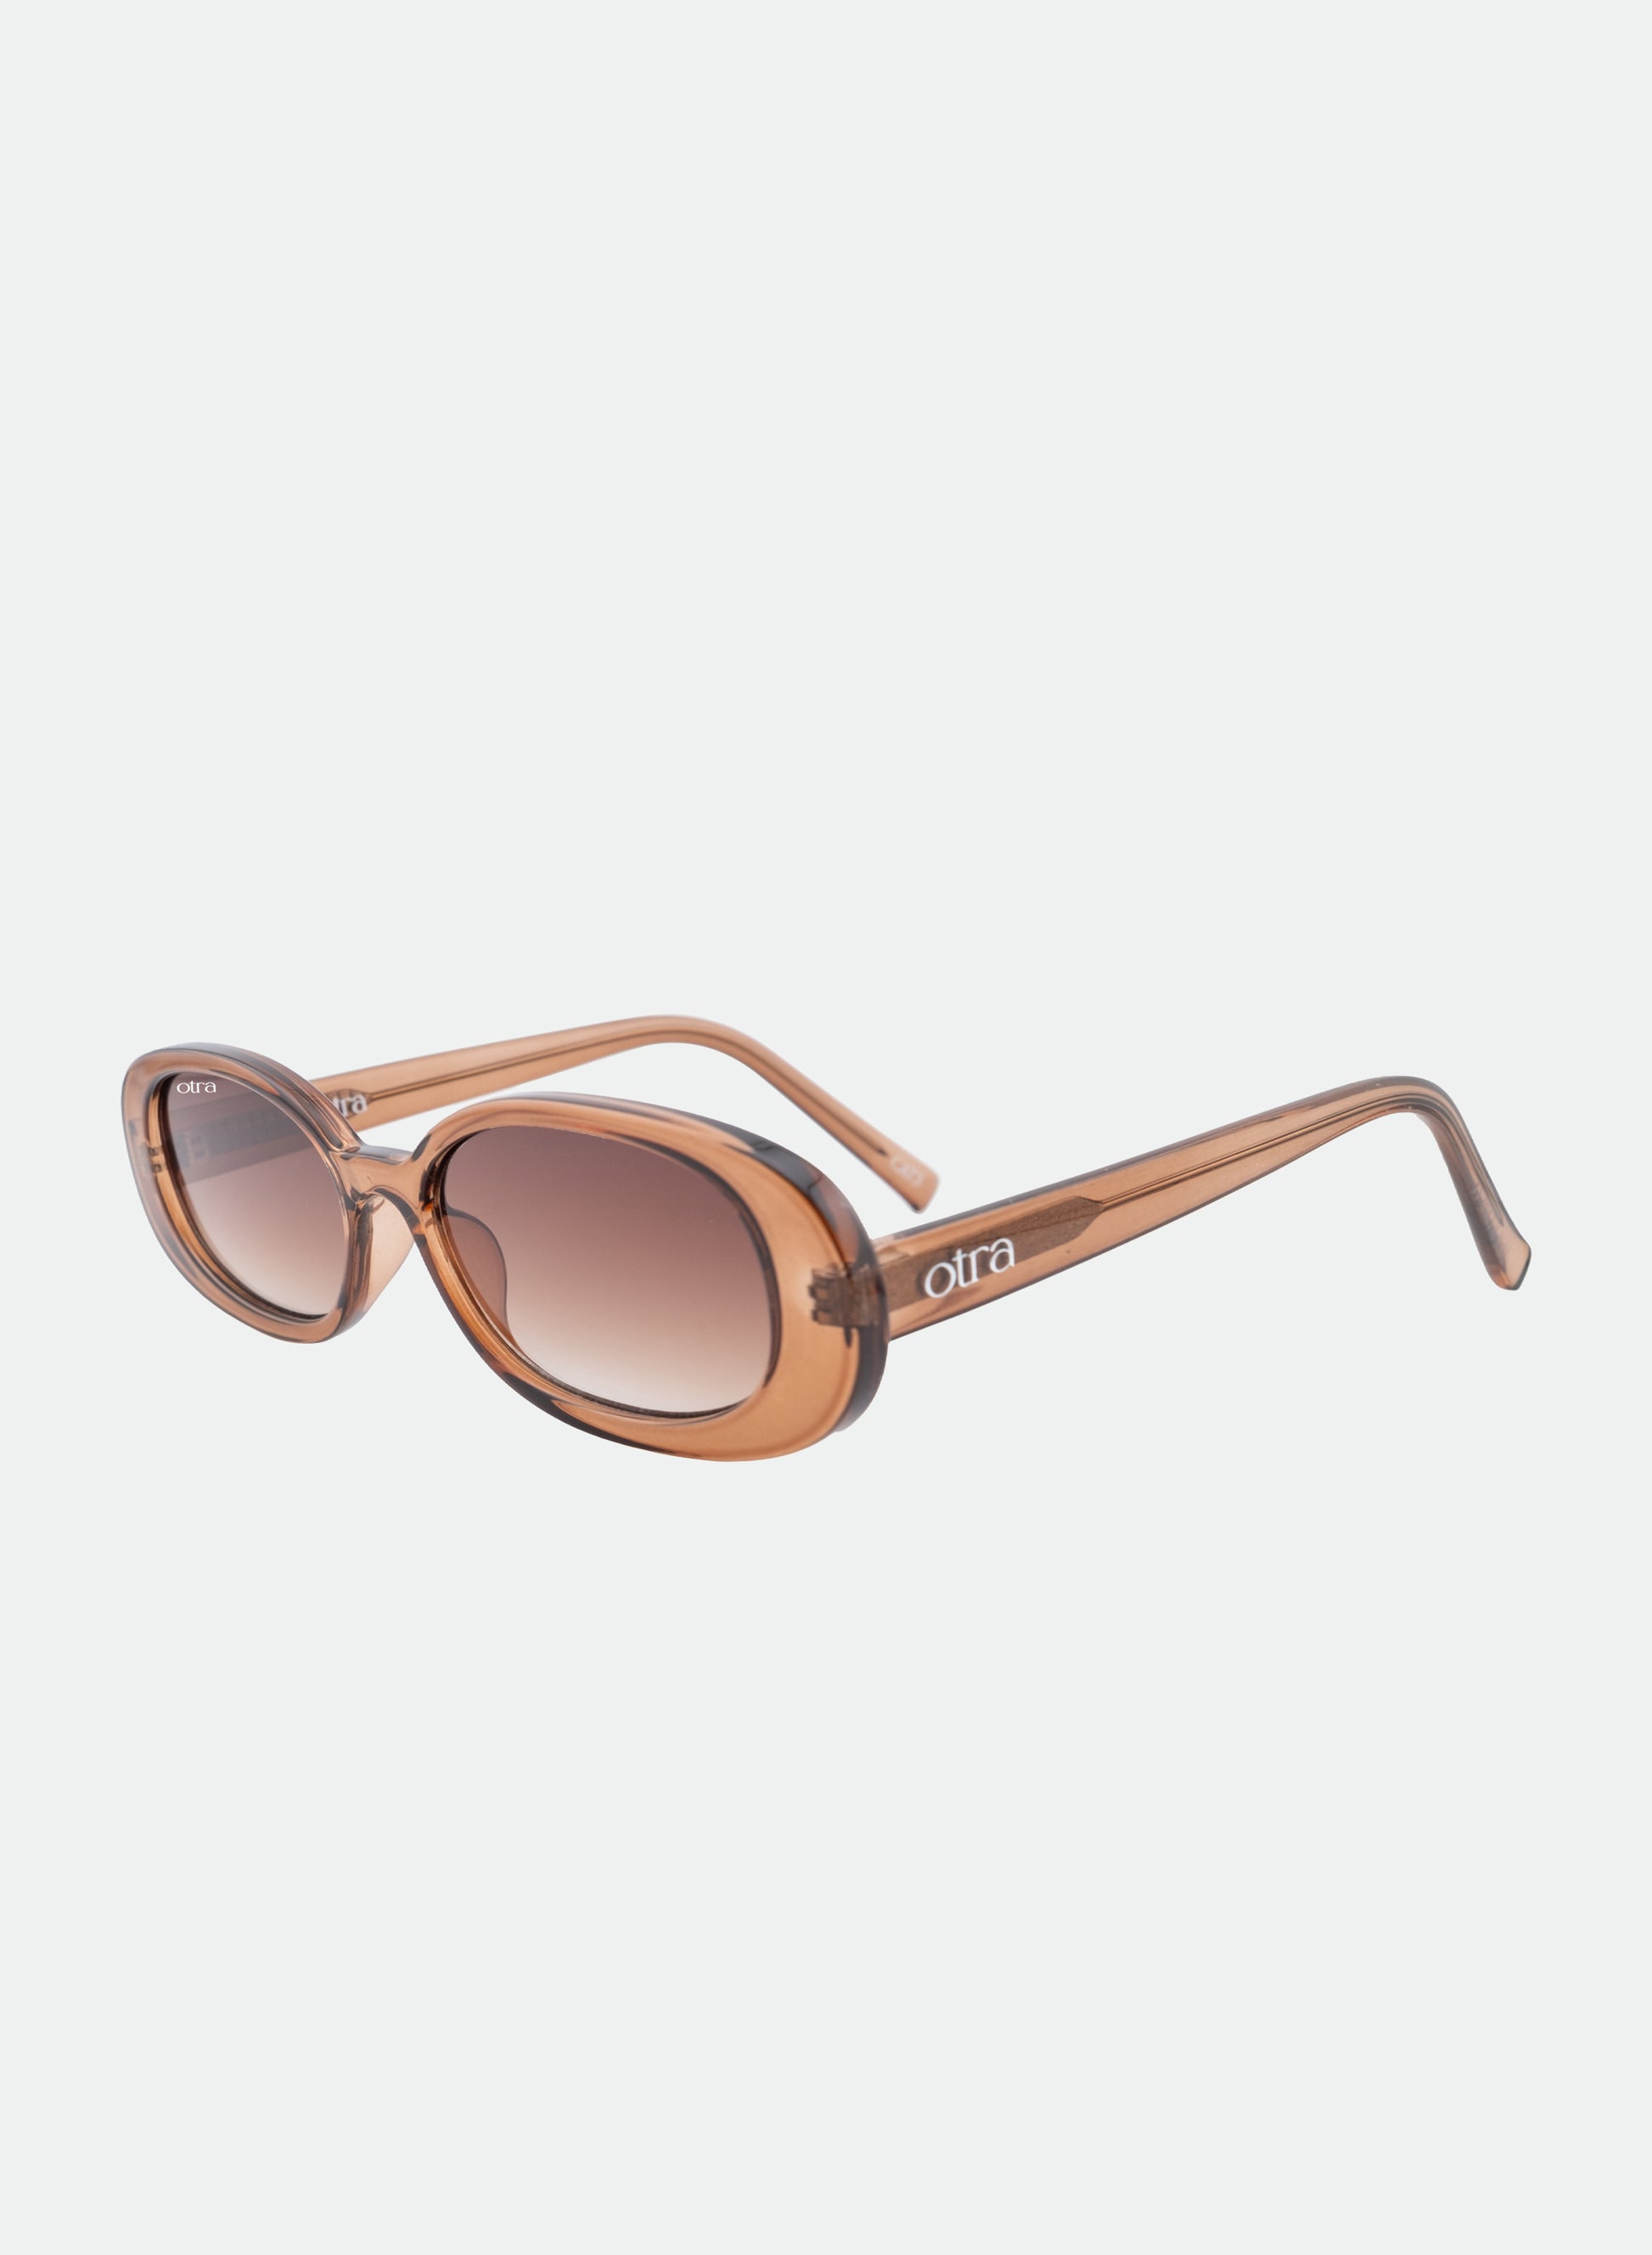 Gina sunglasses in coffee side view